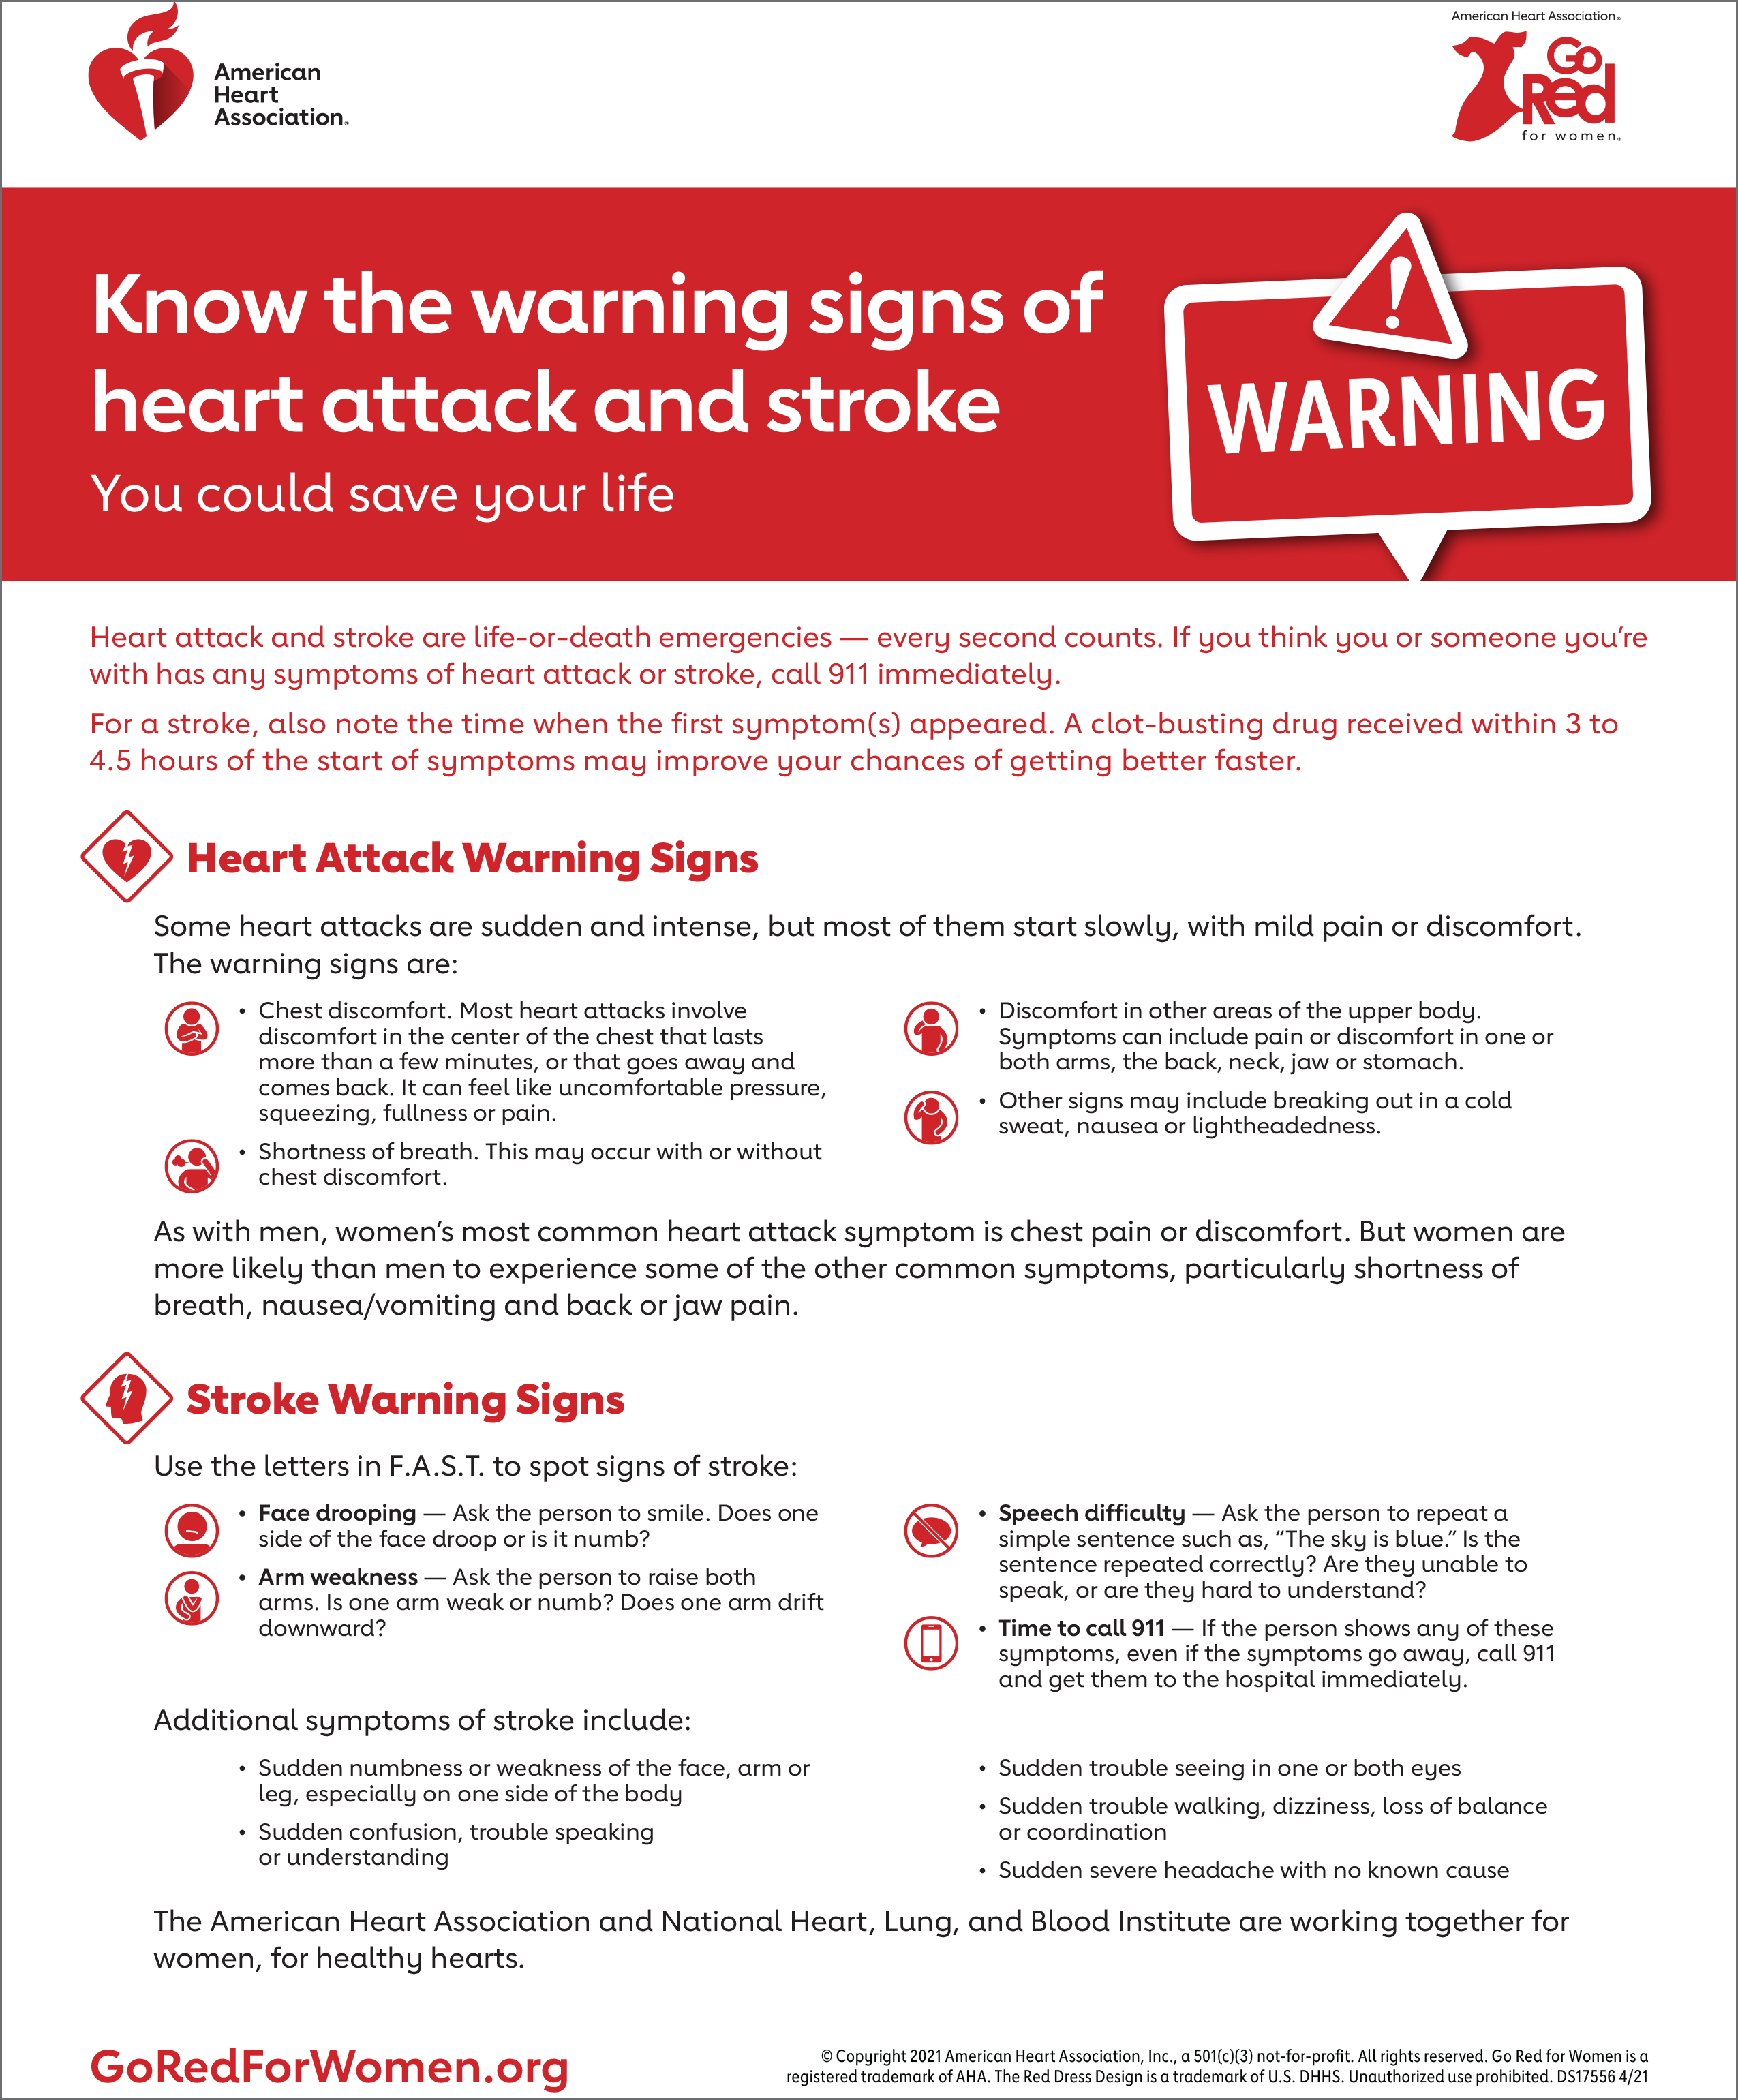 Know the warning signs of heart attack and stroke: You could save your life. GoRedForWomen.org.